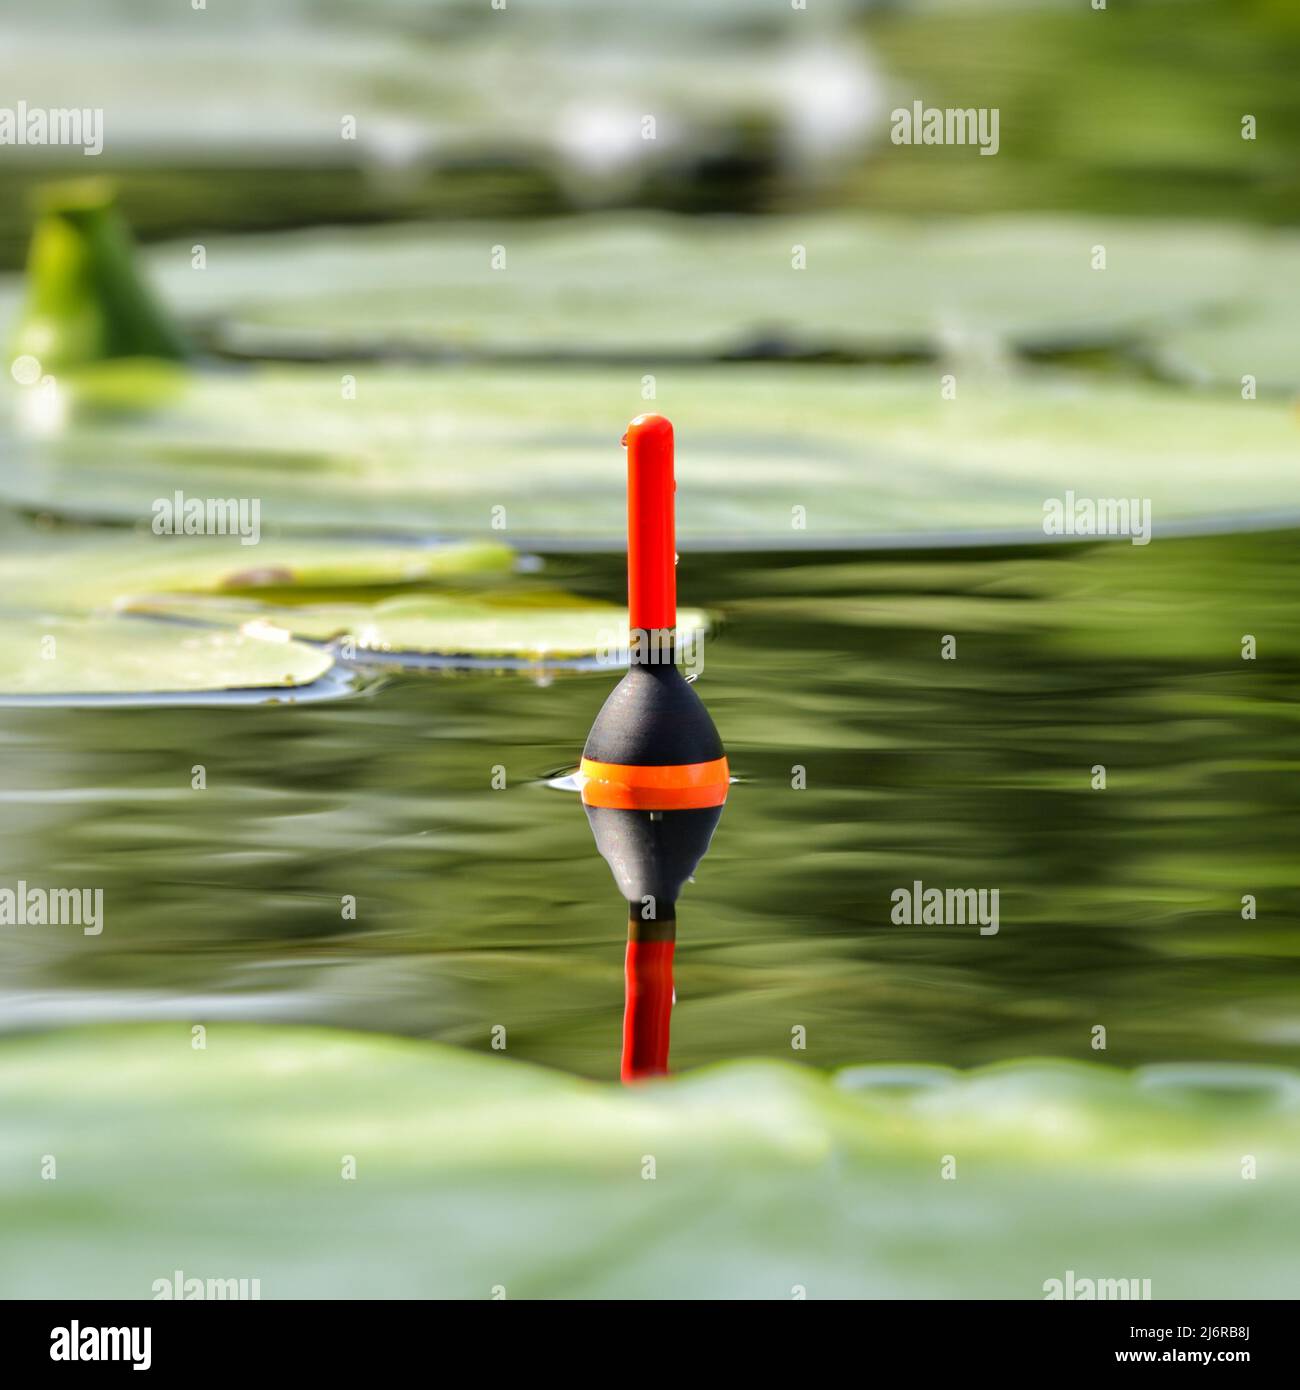 https://c8.alamy.com/comp/2J6RB8J/fishing-float-in-the-lake-among-water-lily-leaves-angling-tackle-with-a-bobber-in-the-water-on-the-river-2J6RB8J.jpg